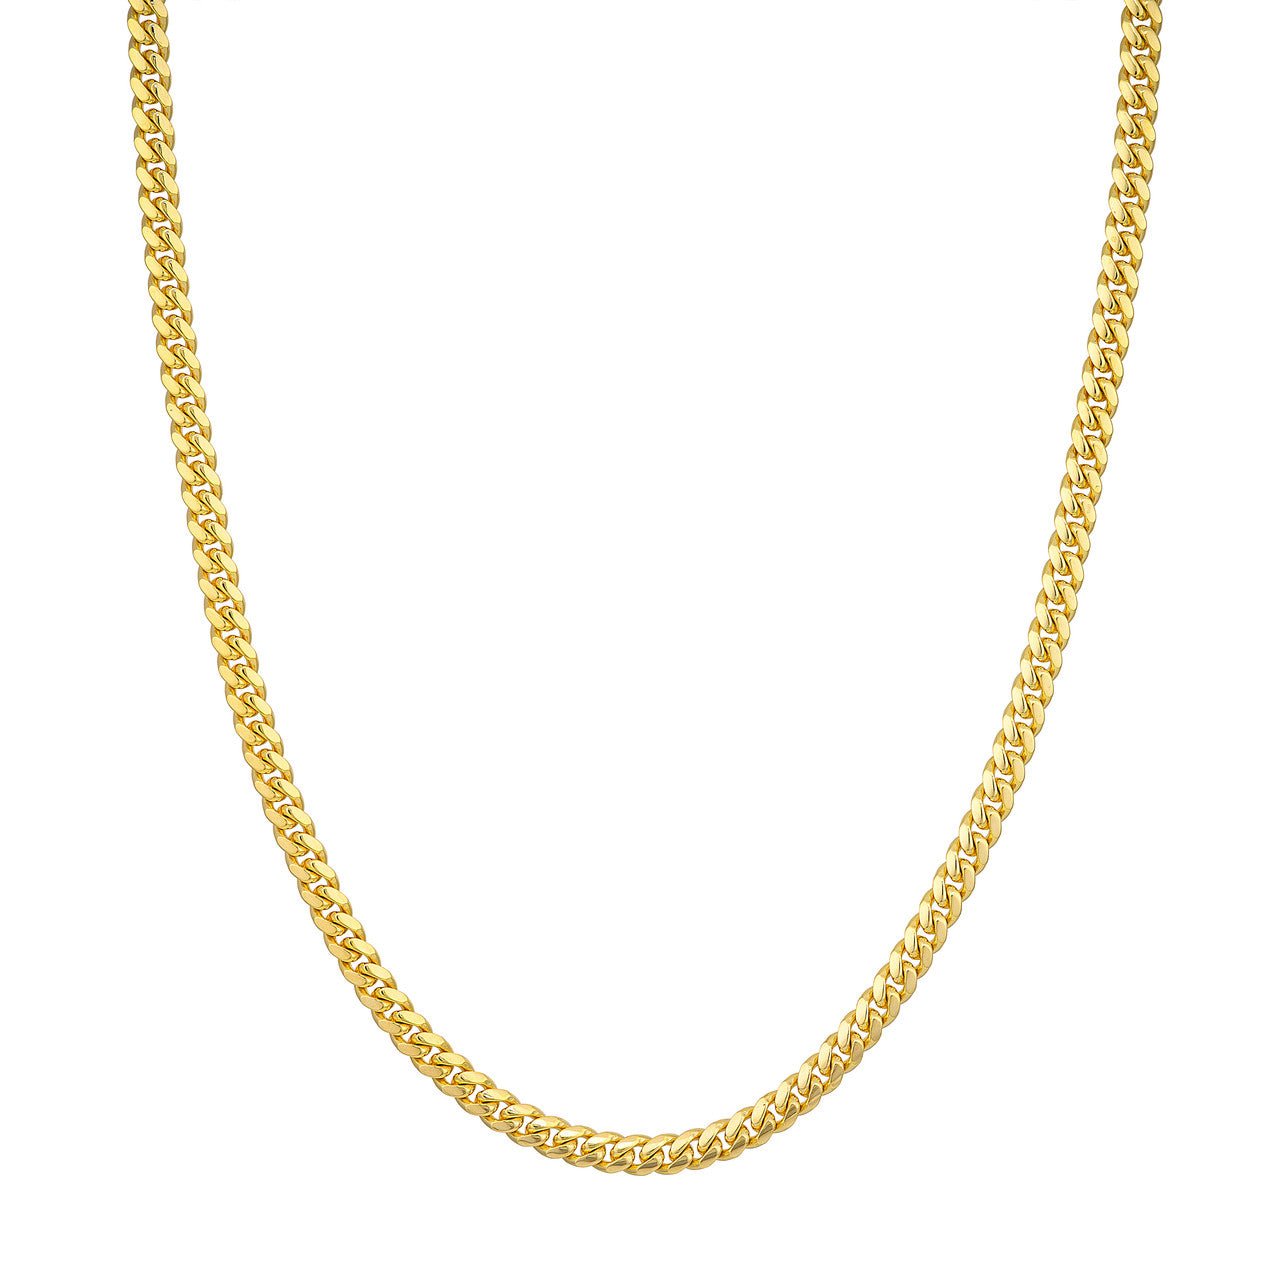 10kt yellow gold/top